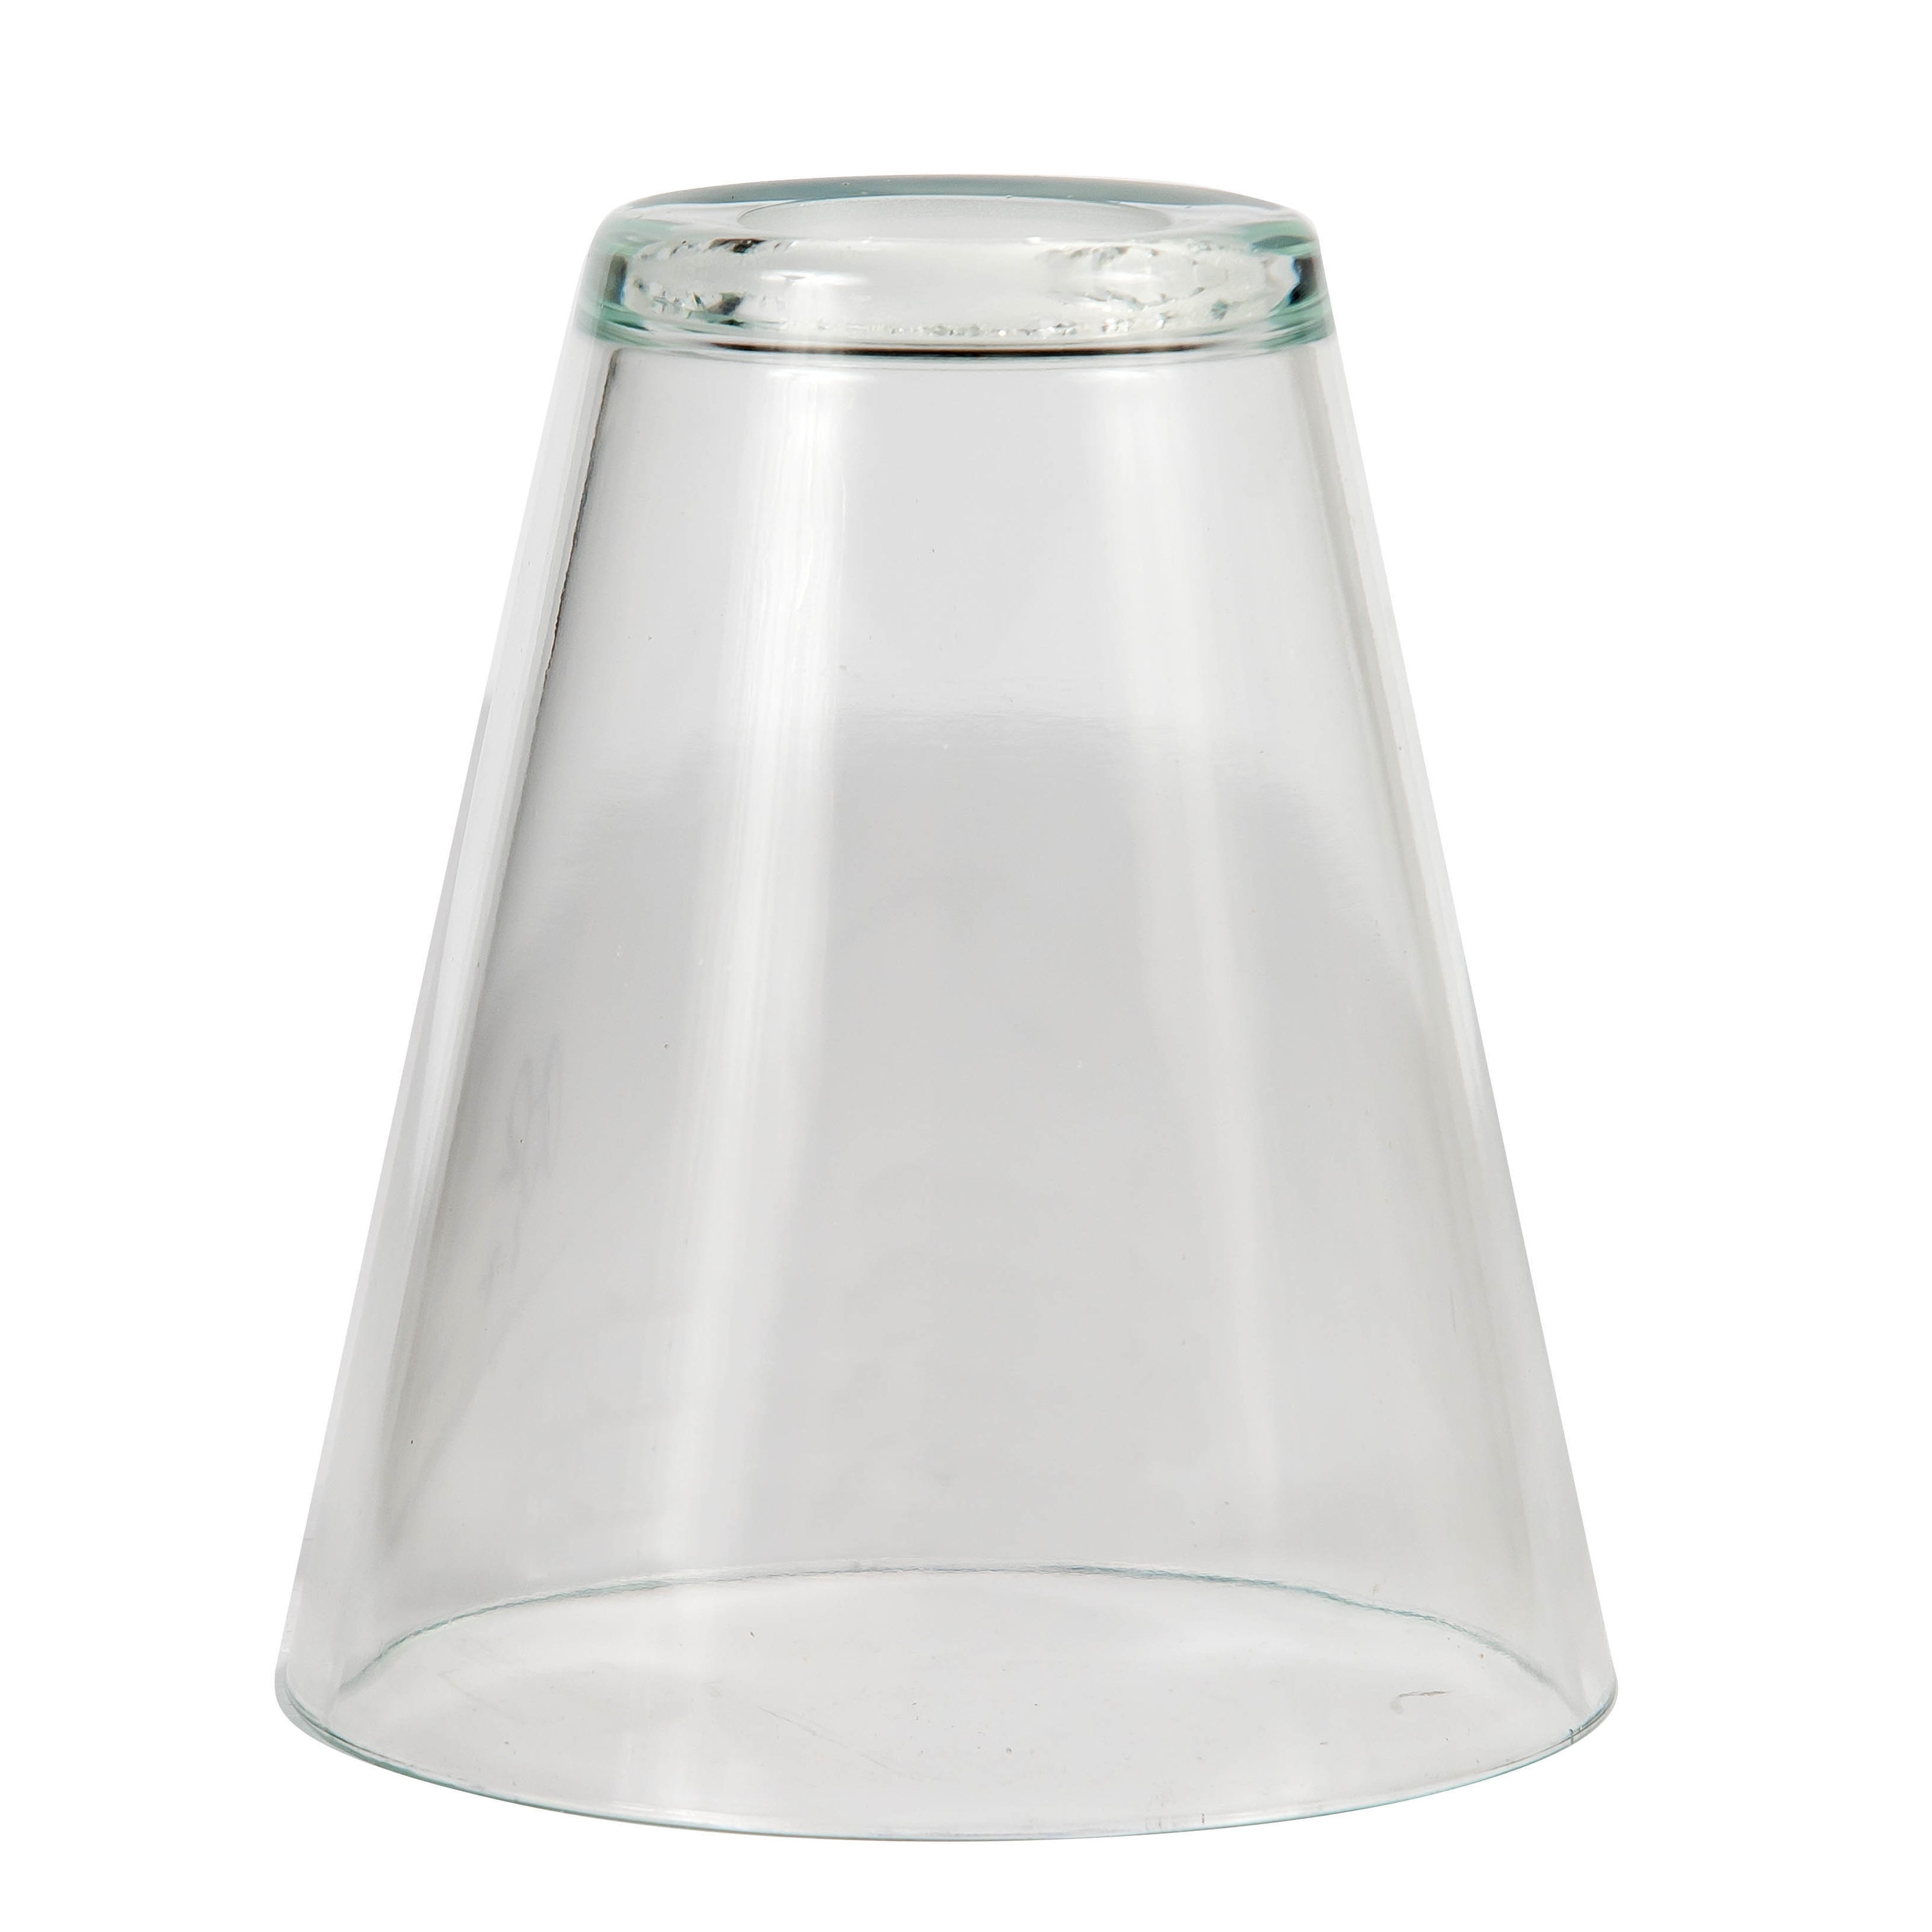 5.75-in x 5.16-in Cone Clear Glass Vanity Light Shade with 2-1/4-in fitter | - allen + roth N443C